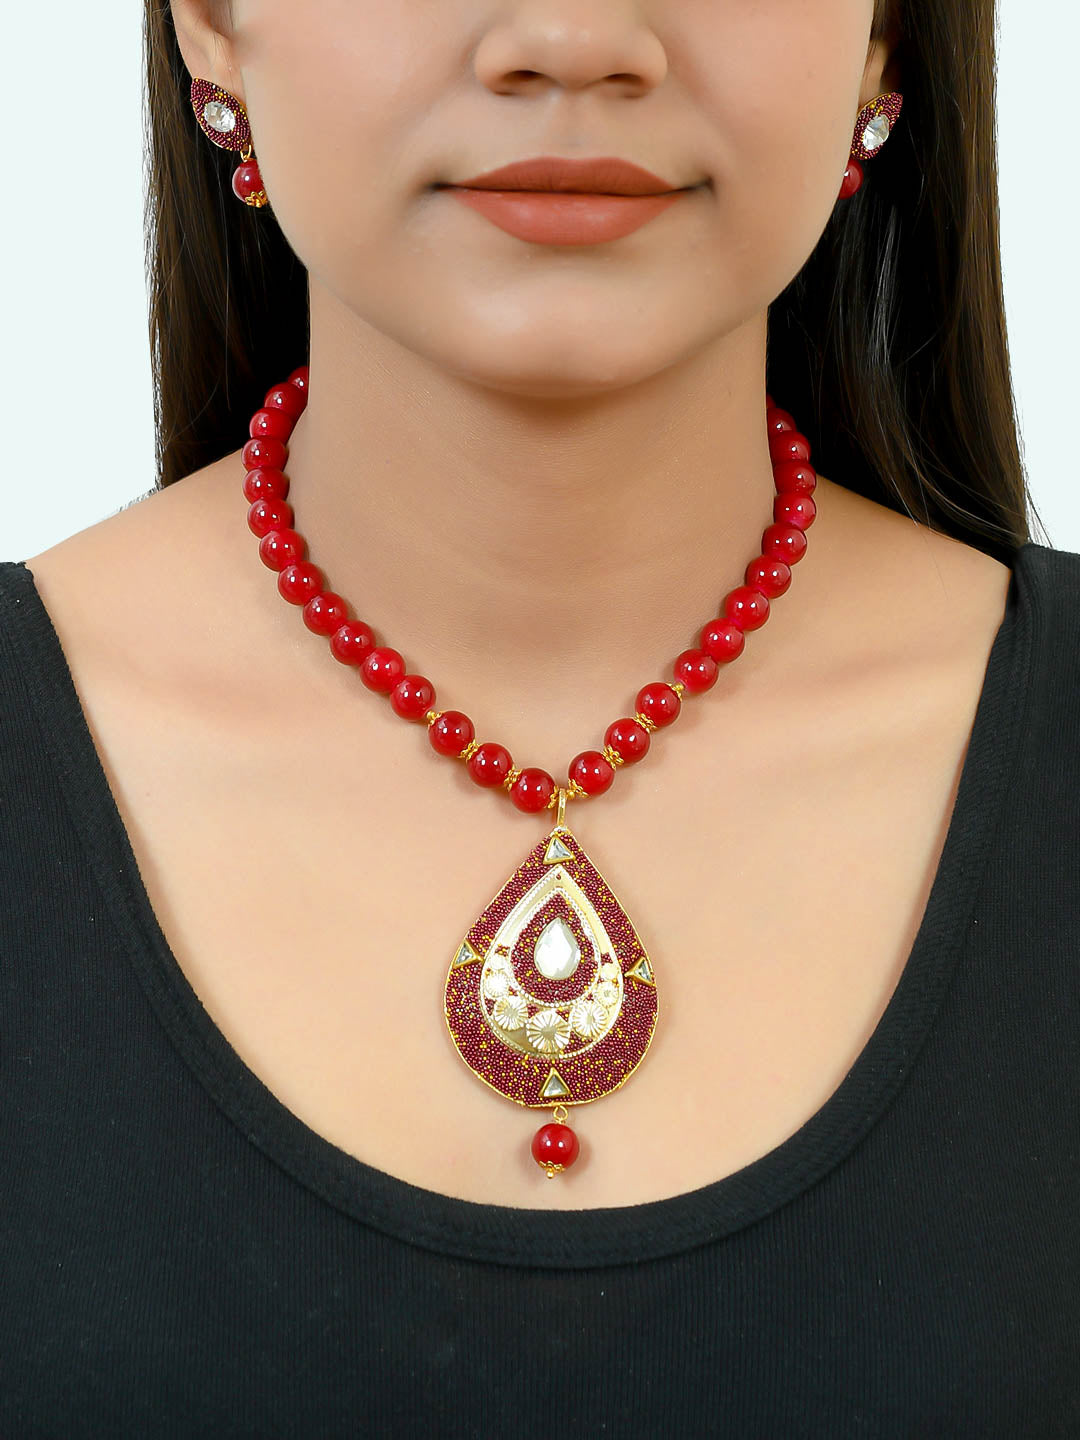 Red Meenakari Long Necklace With Earrings for Women Online